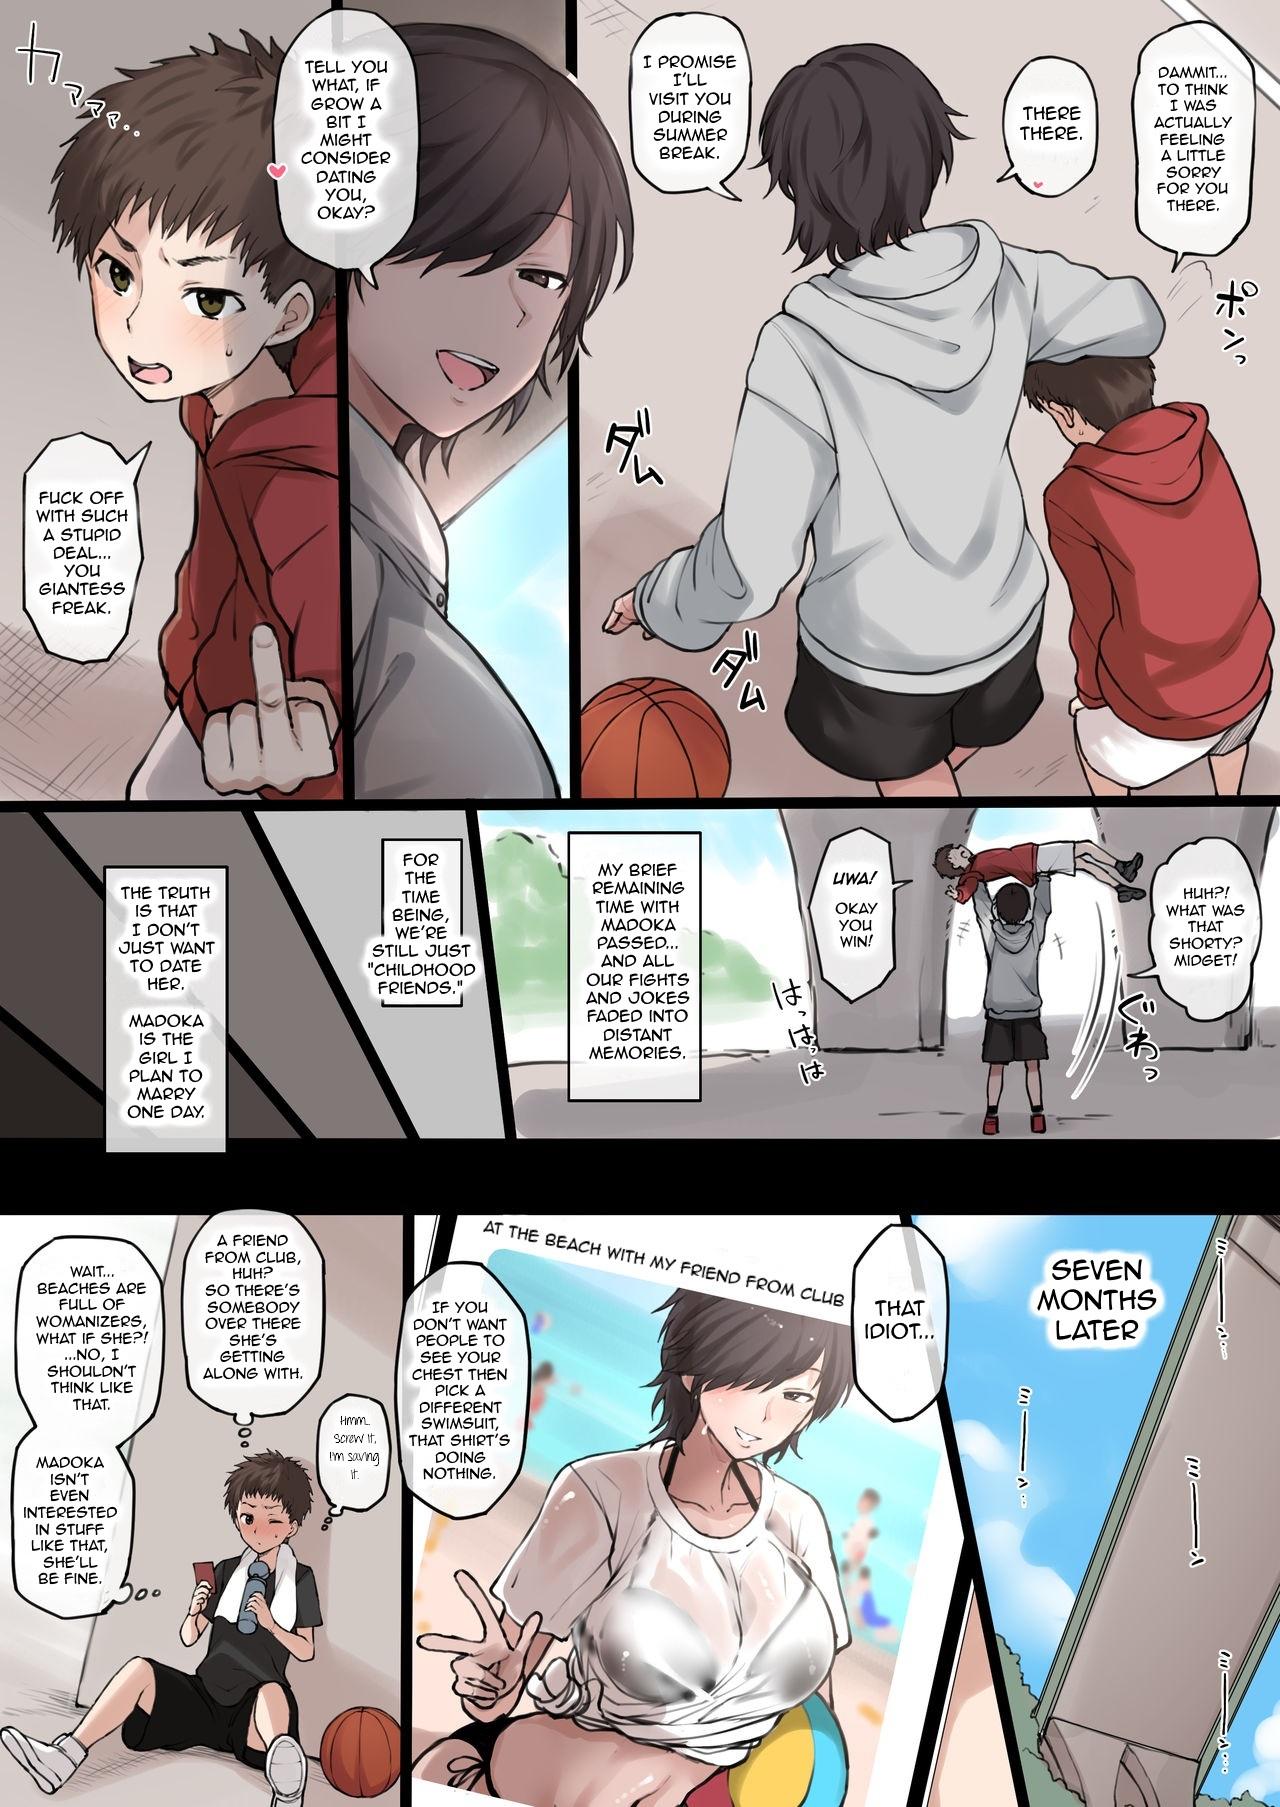 Ink An NTR Perspective of a Picture Uploaded to Twitter of a Tall and Sporty Tomboy Arabic - Page 4